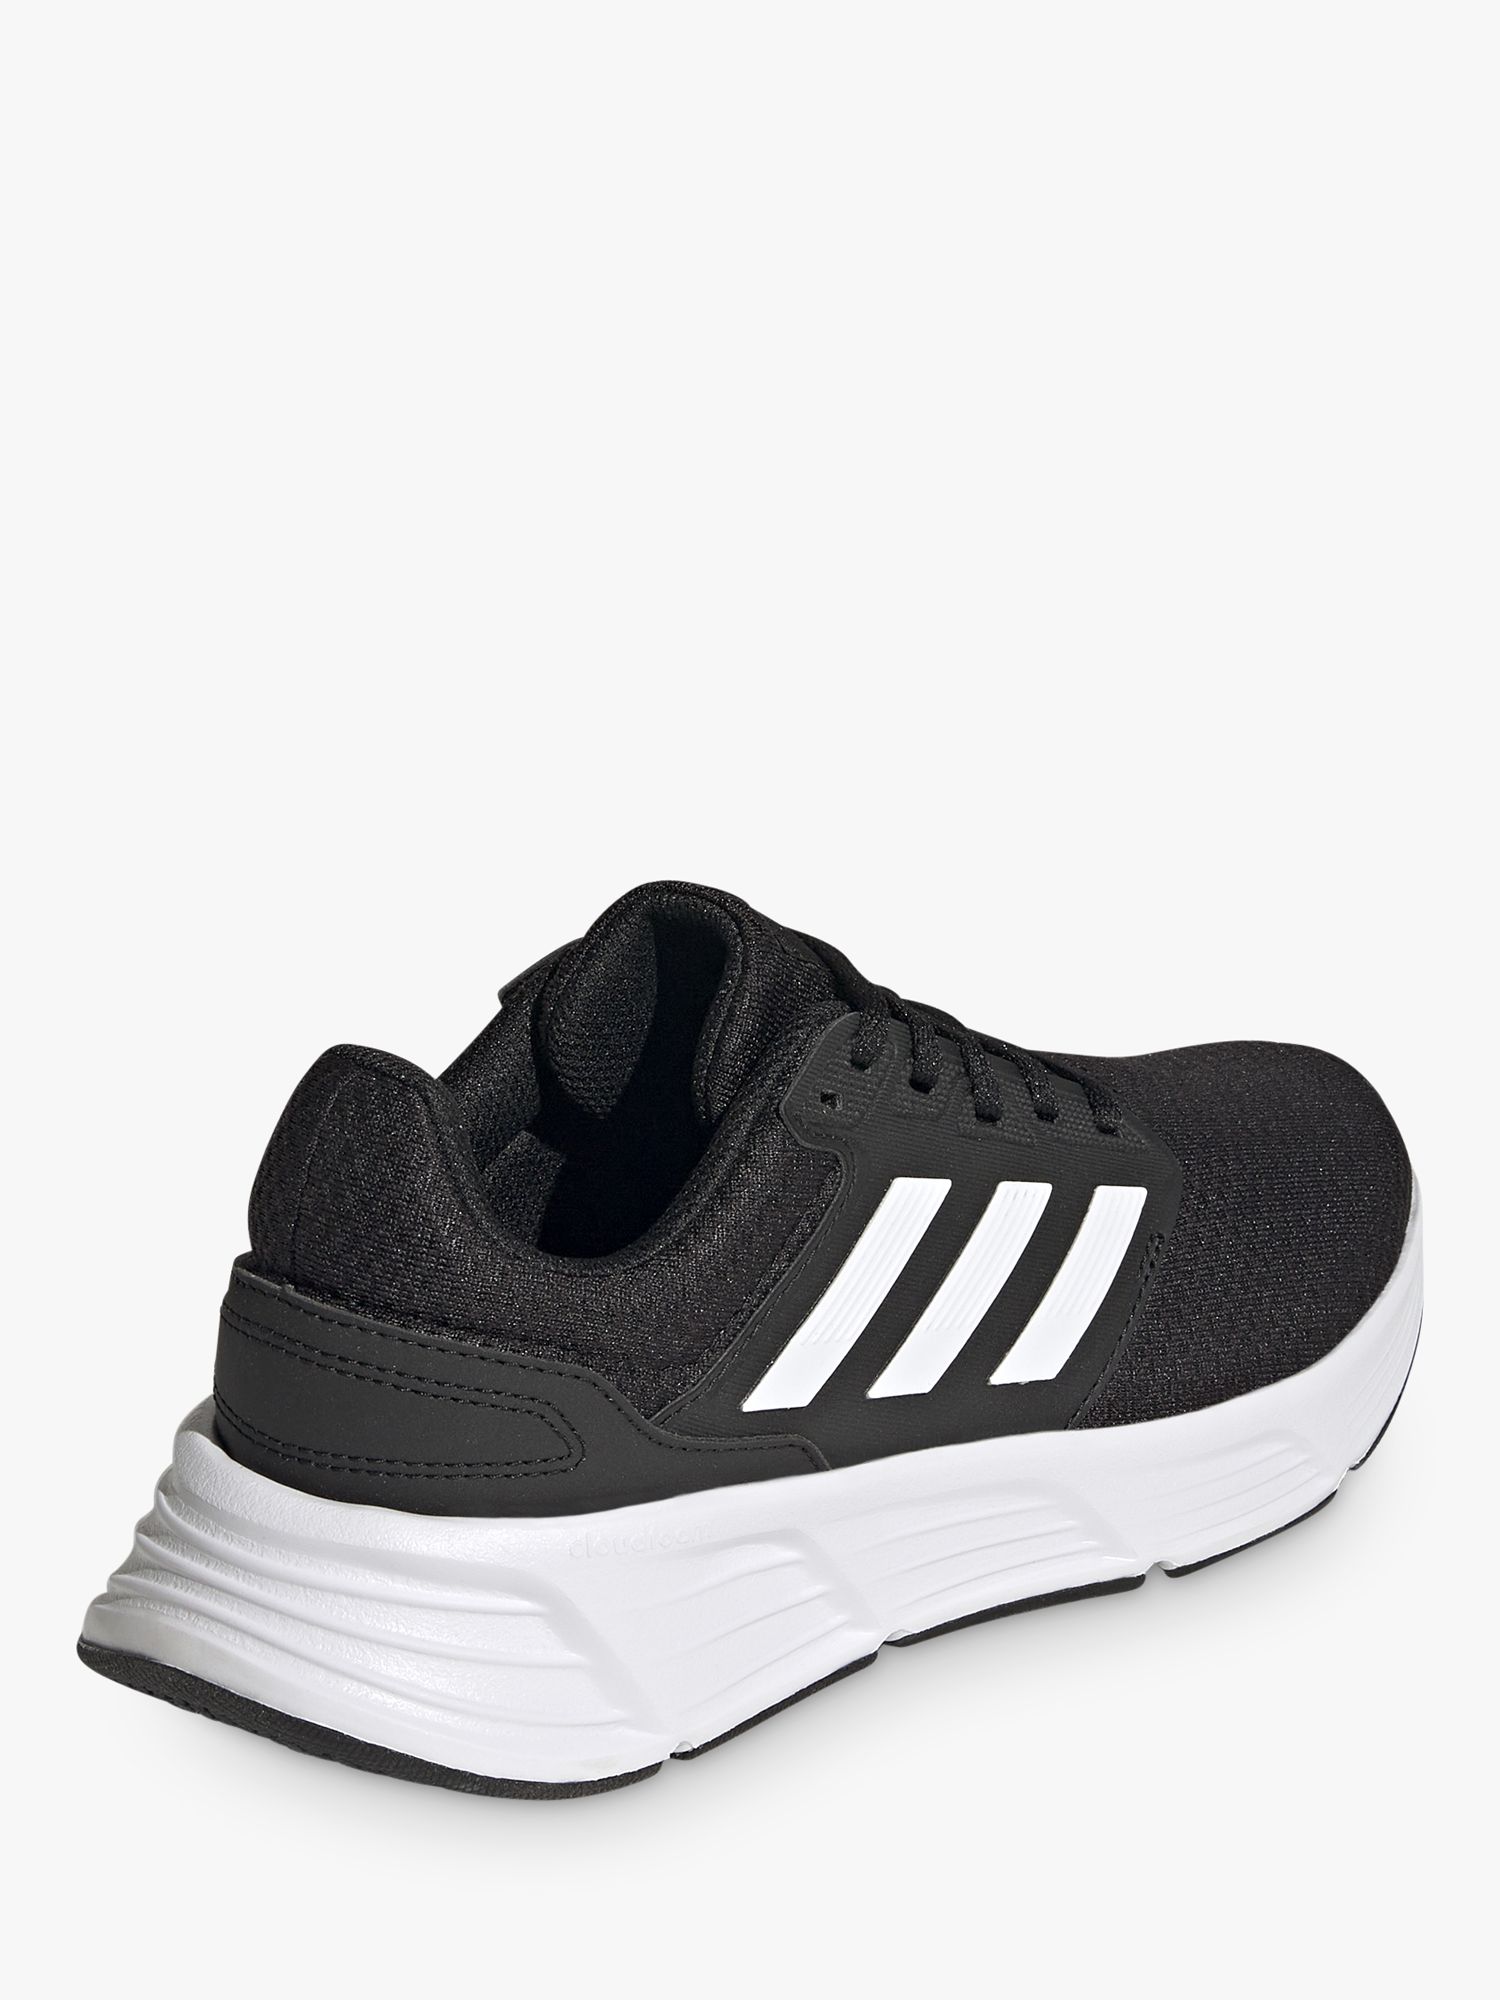 Buy adidas Galaxy 6 Women's Running Shoes Online at johnlewis.com